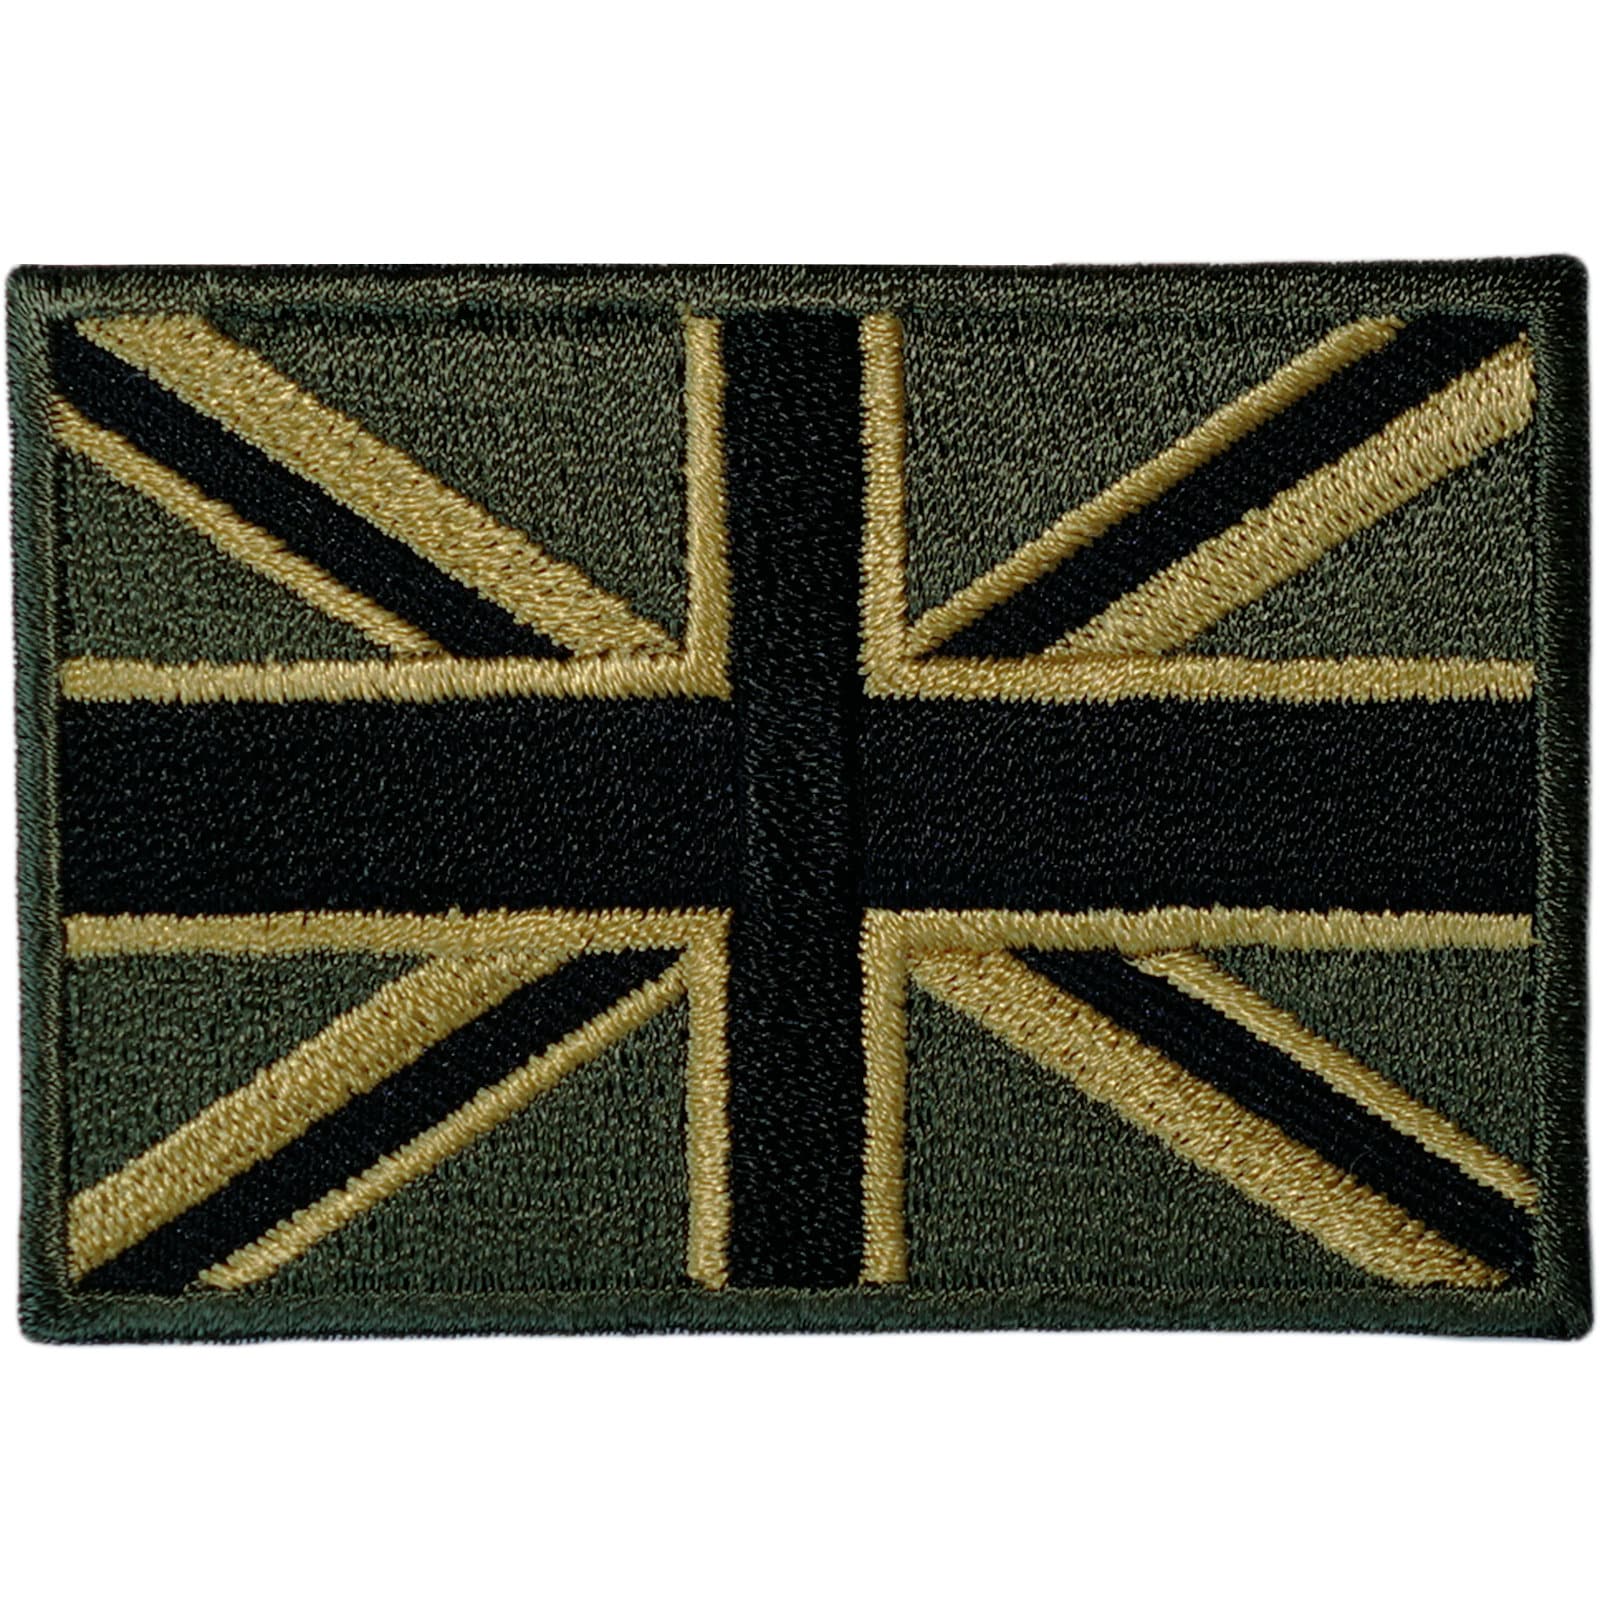 Frcolor Patches Patch Badges Sew Clothes Flag Elements Sewing British  Embroidery Cartoon Clothing Jackets Union Jack Iron 